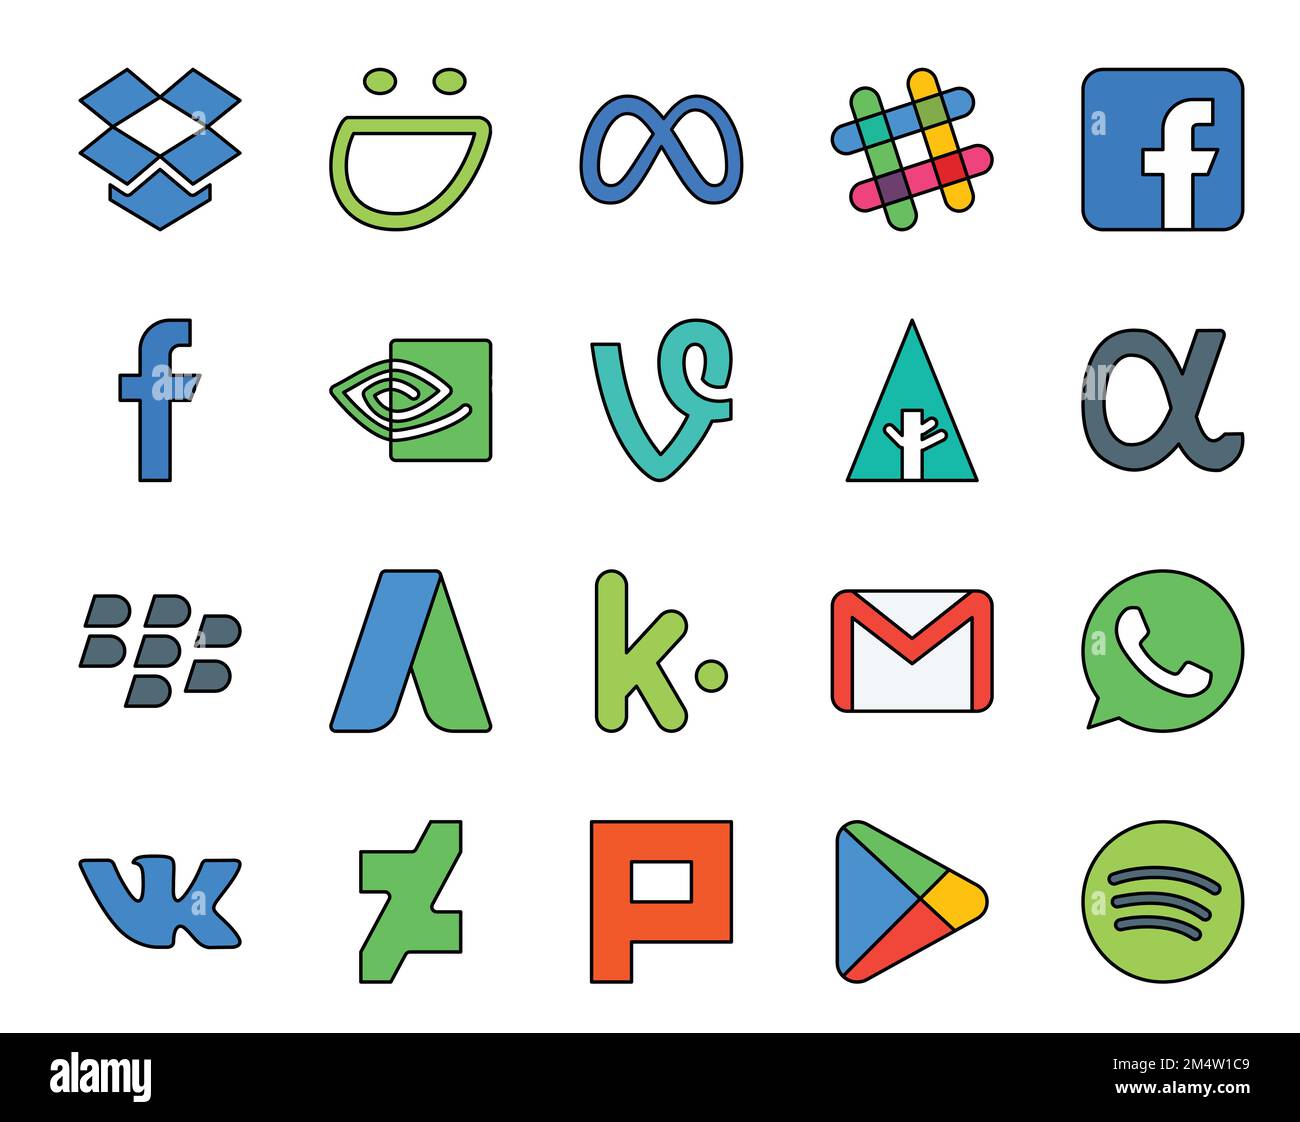 20 Social Media Icon Pack Including whatsapp. email. vine. gmail. adwords Stock Vector